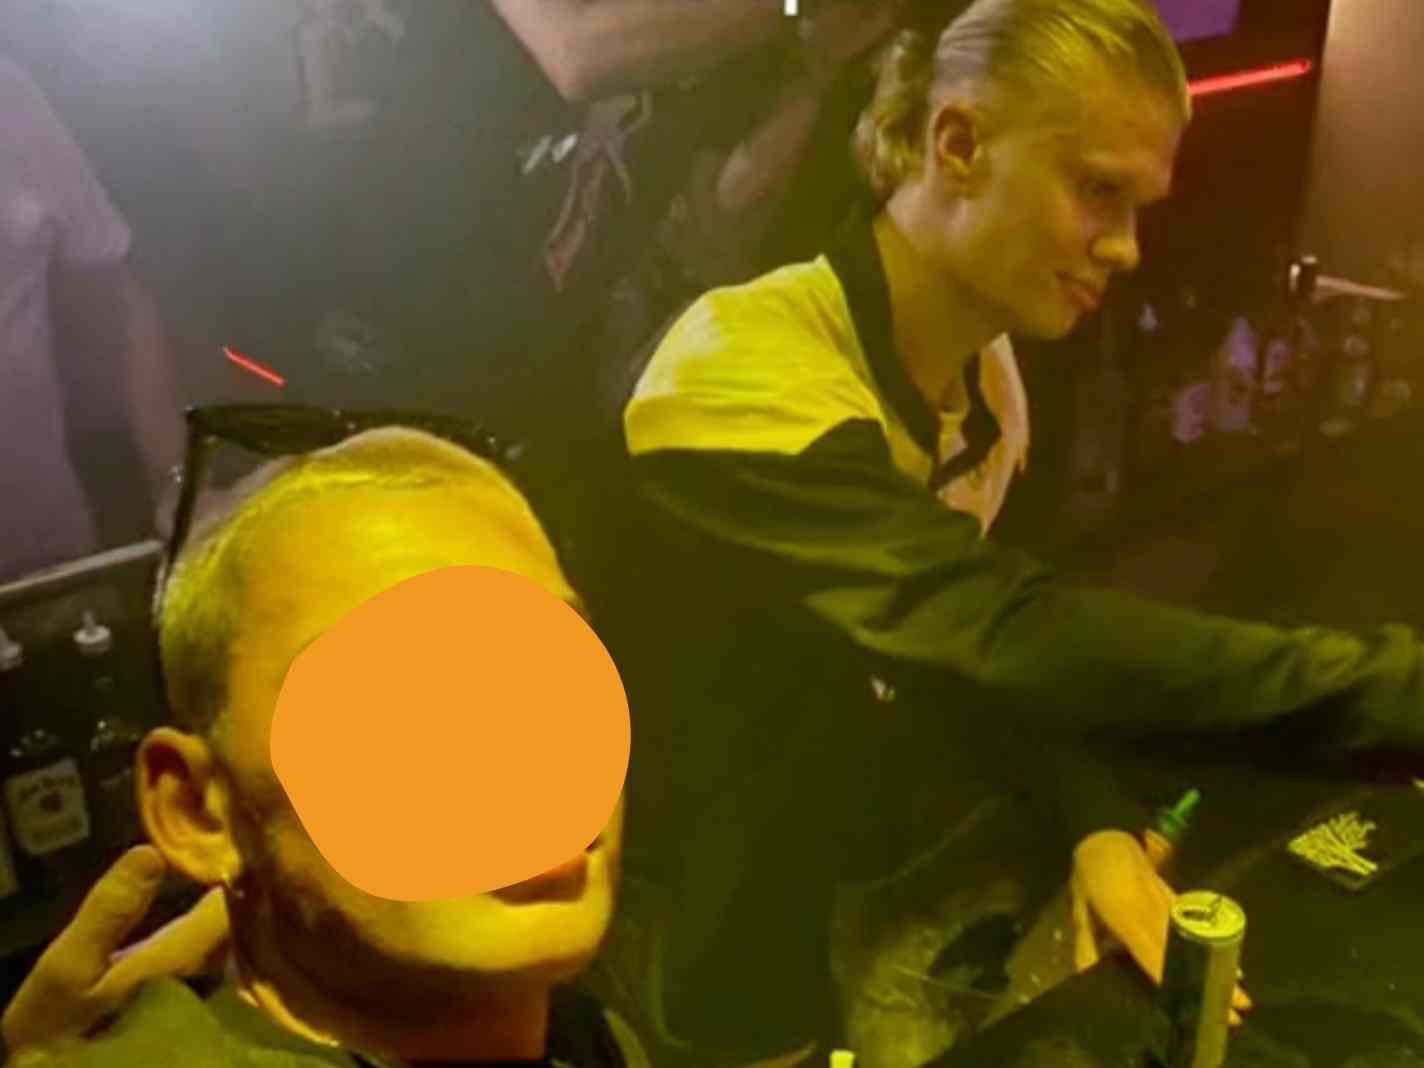 In this image - Erling Haaland (at the back) tending the bar for Borussia Dortmund fans